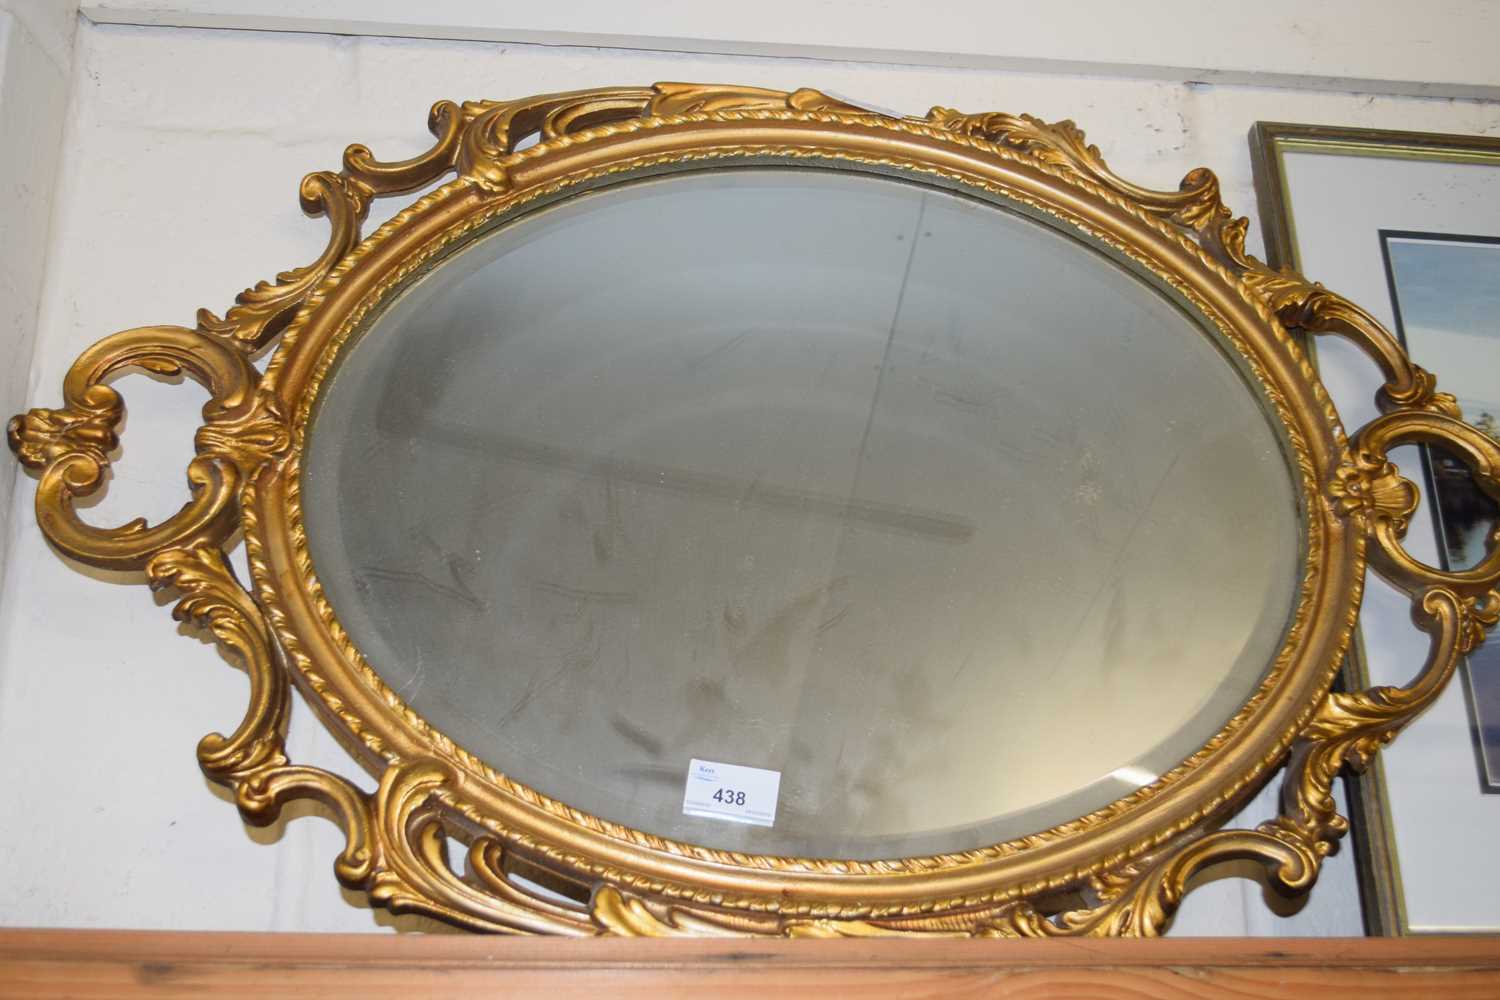 OVAL BEVELLED WALL MIRROR IN A GILT FINISH METAL FRAME